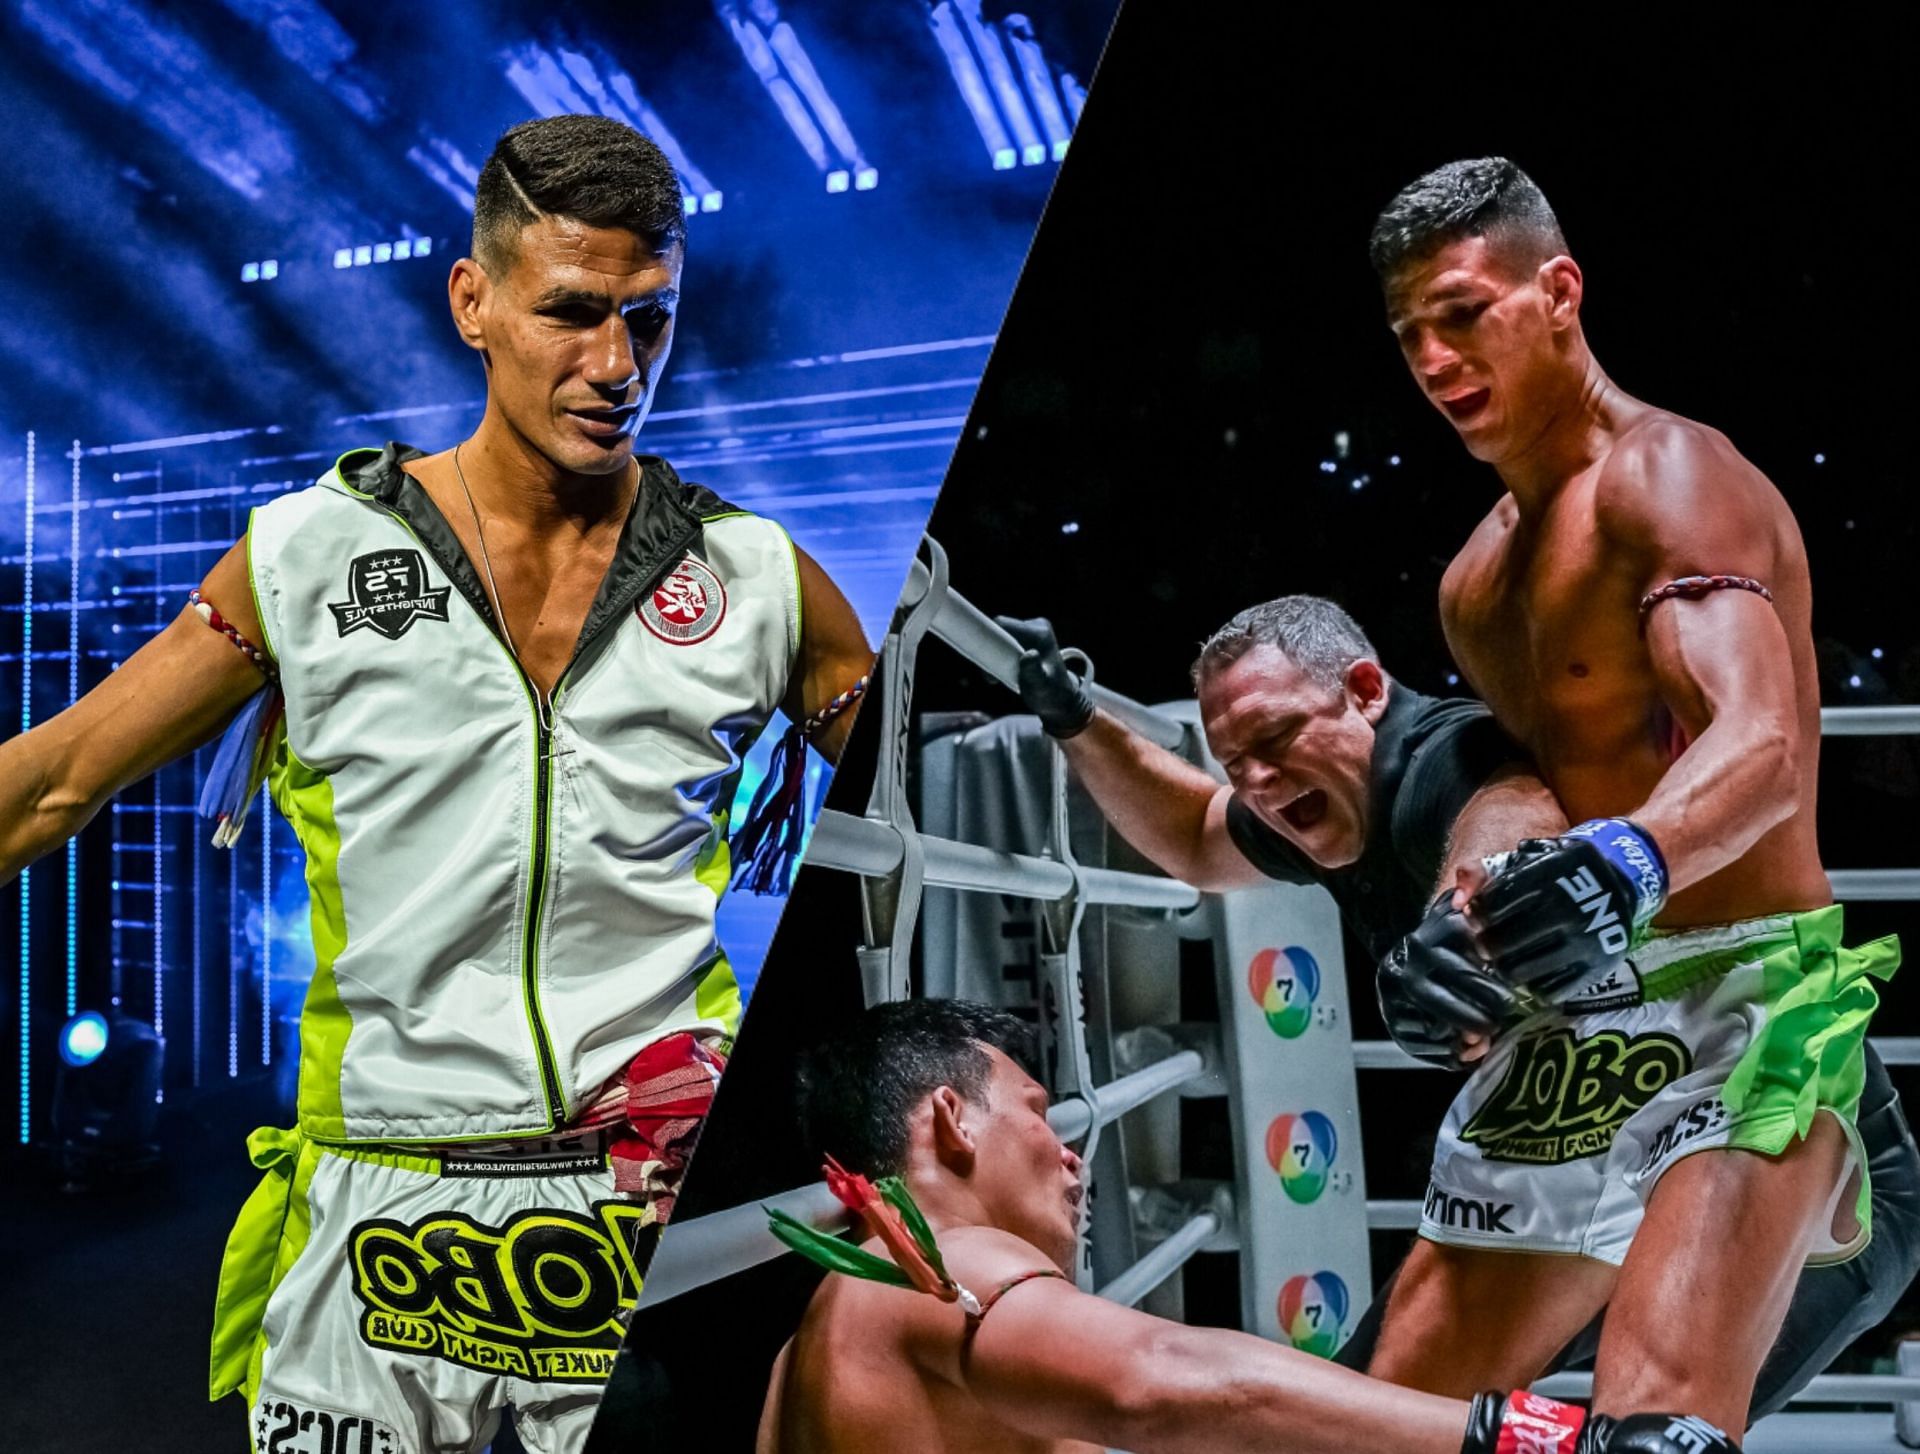 Julio Lobo on his way to victory in Bangkok. [Image: ONE Championship]